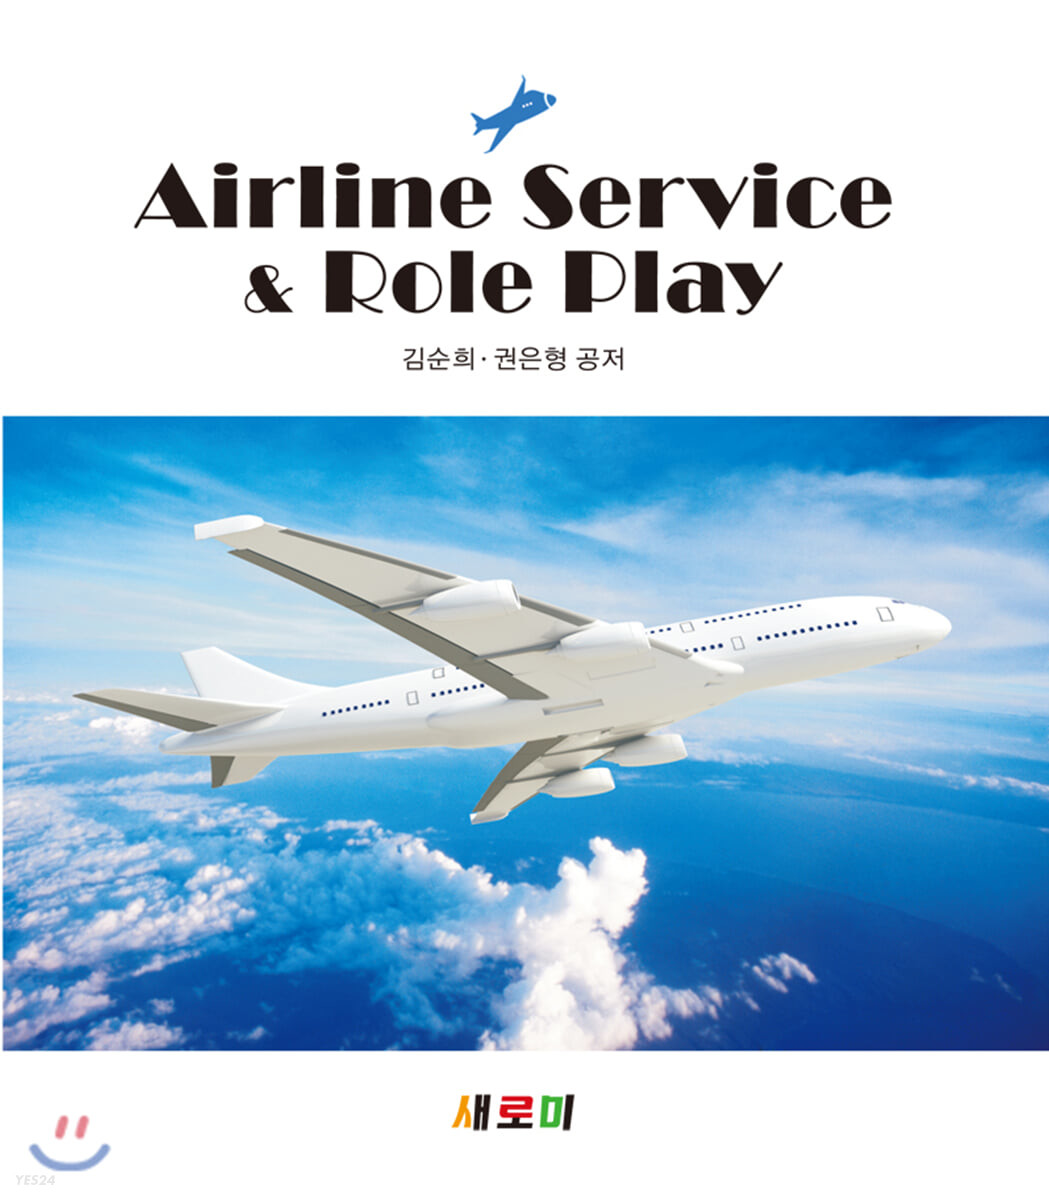 Airline service & role-play / 김순희 저